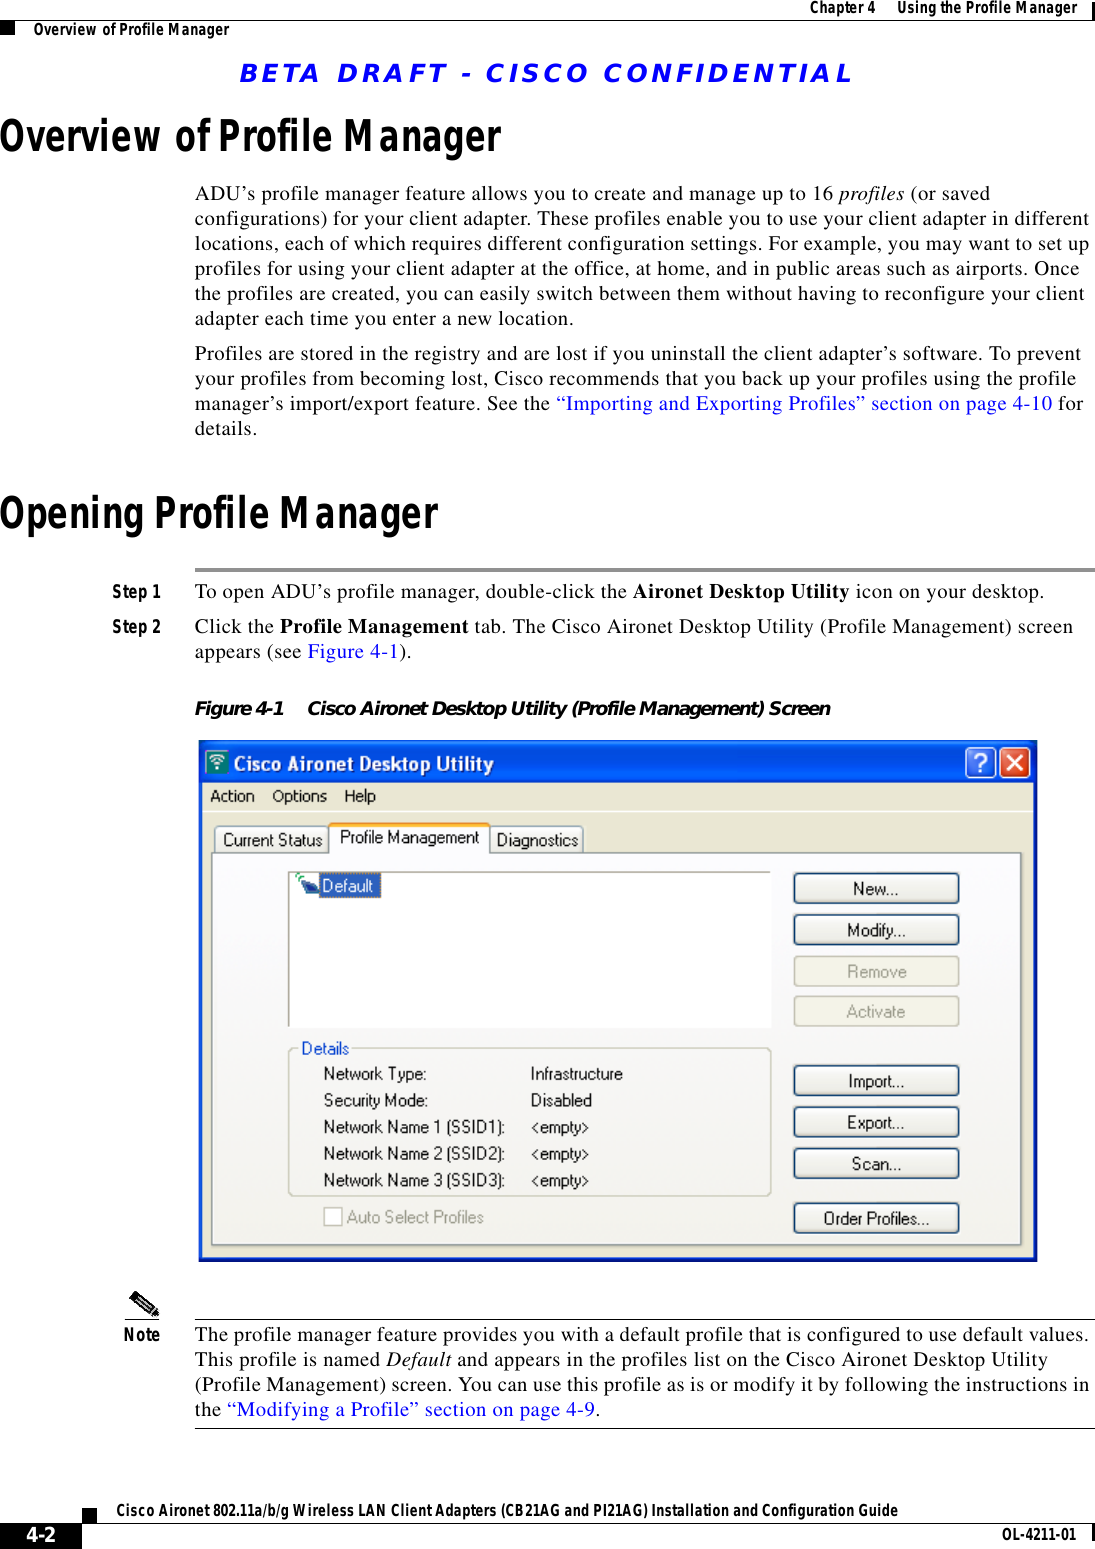 BETA DRAFT - CISCO CONFIDENTIAL4-2Cisco Aironet 802.11a/b/g Wireless LAN Client Adapters (CB21AG and PI21AG) Installation and Configuration Guide OL-4211-01Chapter 4      Using the Profile ManagerOverview of Profile ManagerOverview of Profile ManagerADU’s profile manager feature allows you to create and manage up to 16 profiles (or saved configurations) for your client adapter. These profiles enable you to use your client adapter in different locations, each of which requires different configuration settings. For example, you may want to set up profiles for using your client adapter at the office, at home, and in public areas such as airports. Once the profiles are created, you can easily switch between them without having to reconfigure your client adapter each time you enter a new location.Profiles are stored in the registry and are lost if you uninstall the client adapter’s software. To prevent your profiles from becoming lost, Cisco recommends that you back up your profiles using the profile manager’s import/export feature. See the “Importing and Exporting Profiles” section on page 4-10 for details.Opening Profile ManagerStep 1 To open ADU’s profile manager, double-click the Aironet Desktop Utility icon on your desktop.Step 2 Click the Profile Management tab. The Cisco Aironet Desktop Utility (Profile Management) screen appears (see Figure 4-1).Figure 4-1 Cisco Aironet Desktop Utility (Profile Management) ScreenNote The profile manager feature provides you with a default profile that is configured to use default values. This profile is named Default and appears in the profiles list on the Cisco Aironet Desktop Utility (Profile Management) screen. You can use this profile as is or modify it by following the instructions in the “Modifying a Profile” section on page 4-9.